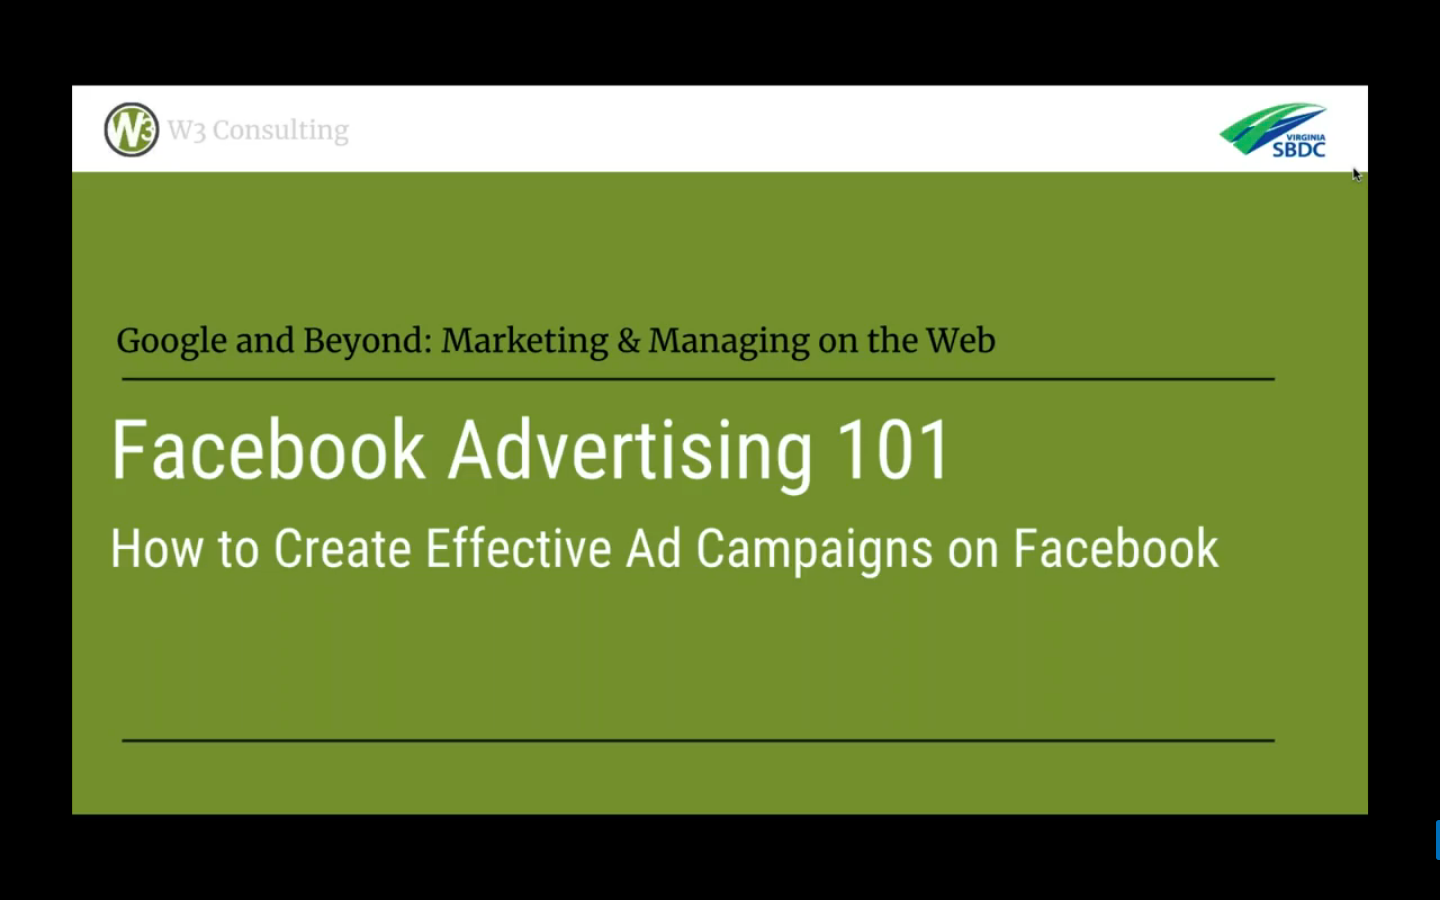 Facebook Advertising 101: How to Create Effective Ad Campaigns on Facebook